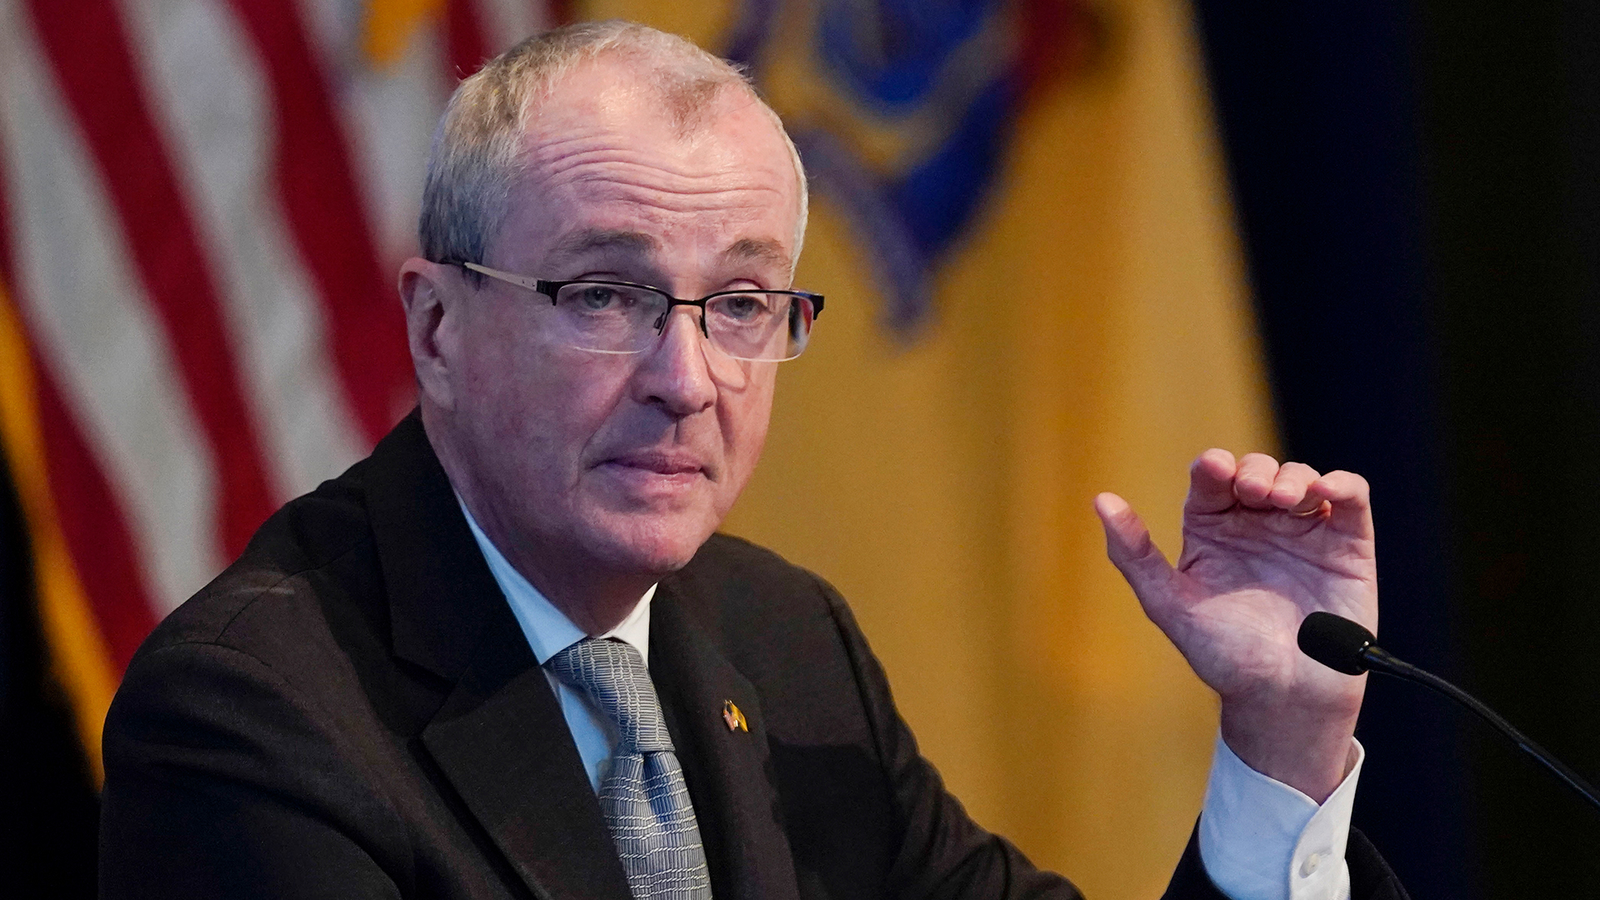 Governor Murphy hosts roundtable on modernizing New Jersey’s liquor license laws